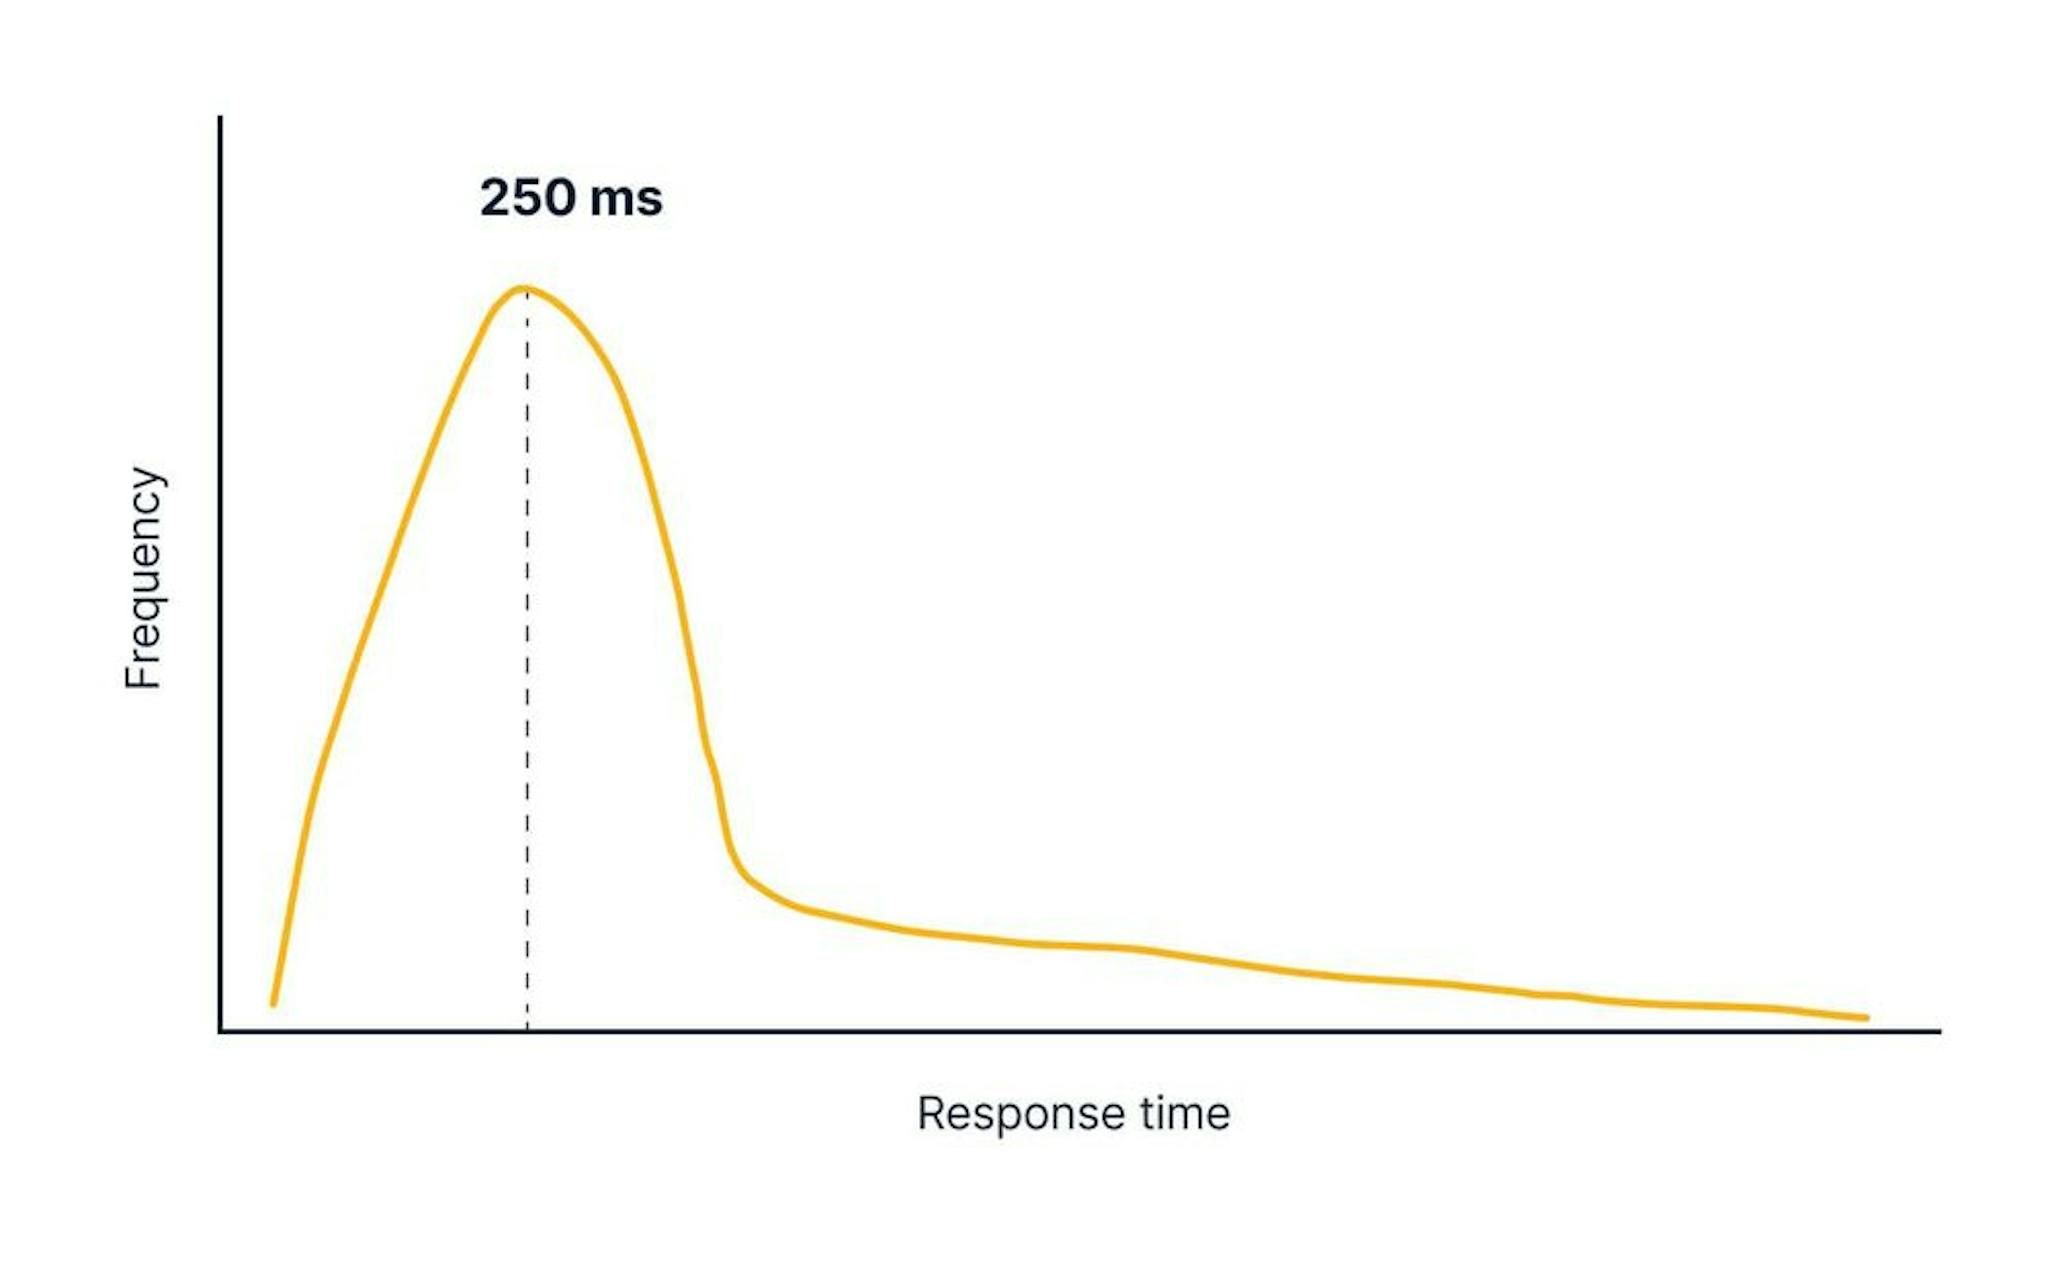 A frequency distribution for API response times with a peak at 250ms (all graphs are not to scale and are meant only for demonstration purposes). 